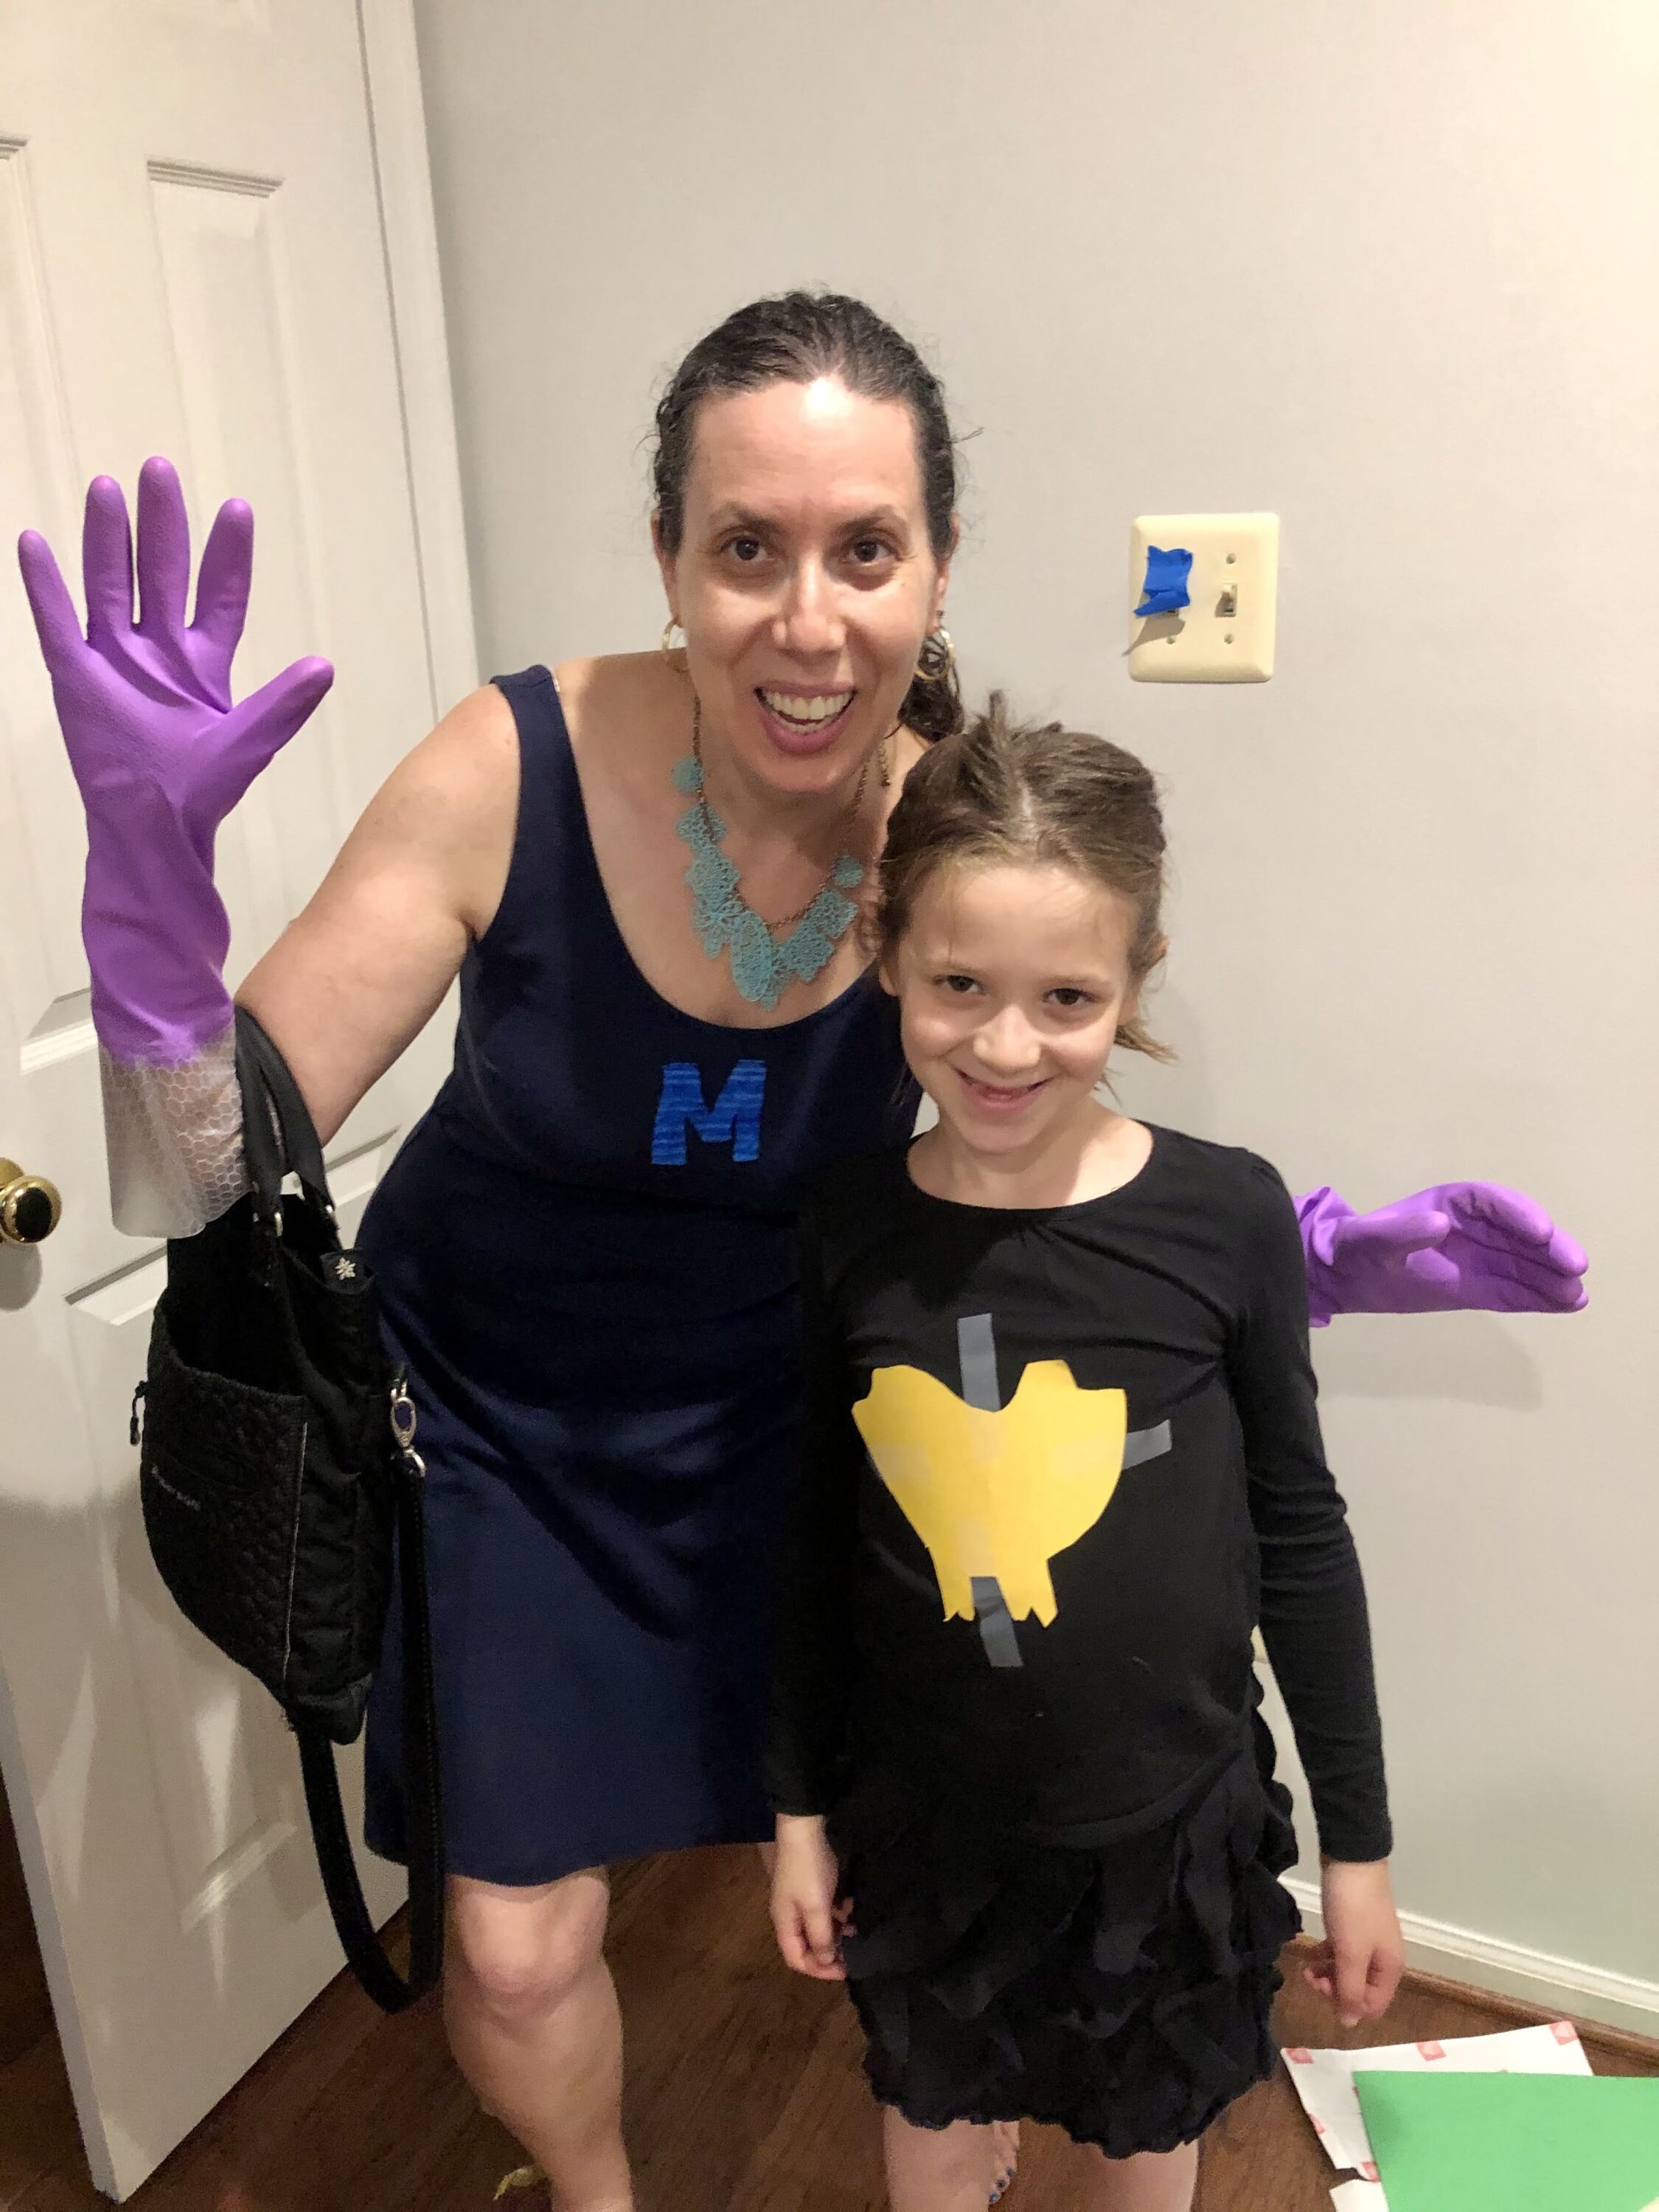 Sarah Feinberg and her daughter, Gali, dressed as Super Mom and Batgirl for “Superhero Shabbat” at home (Courtesy photo)